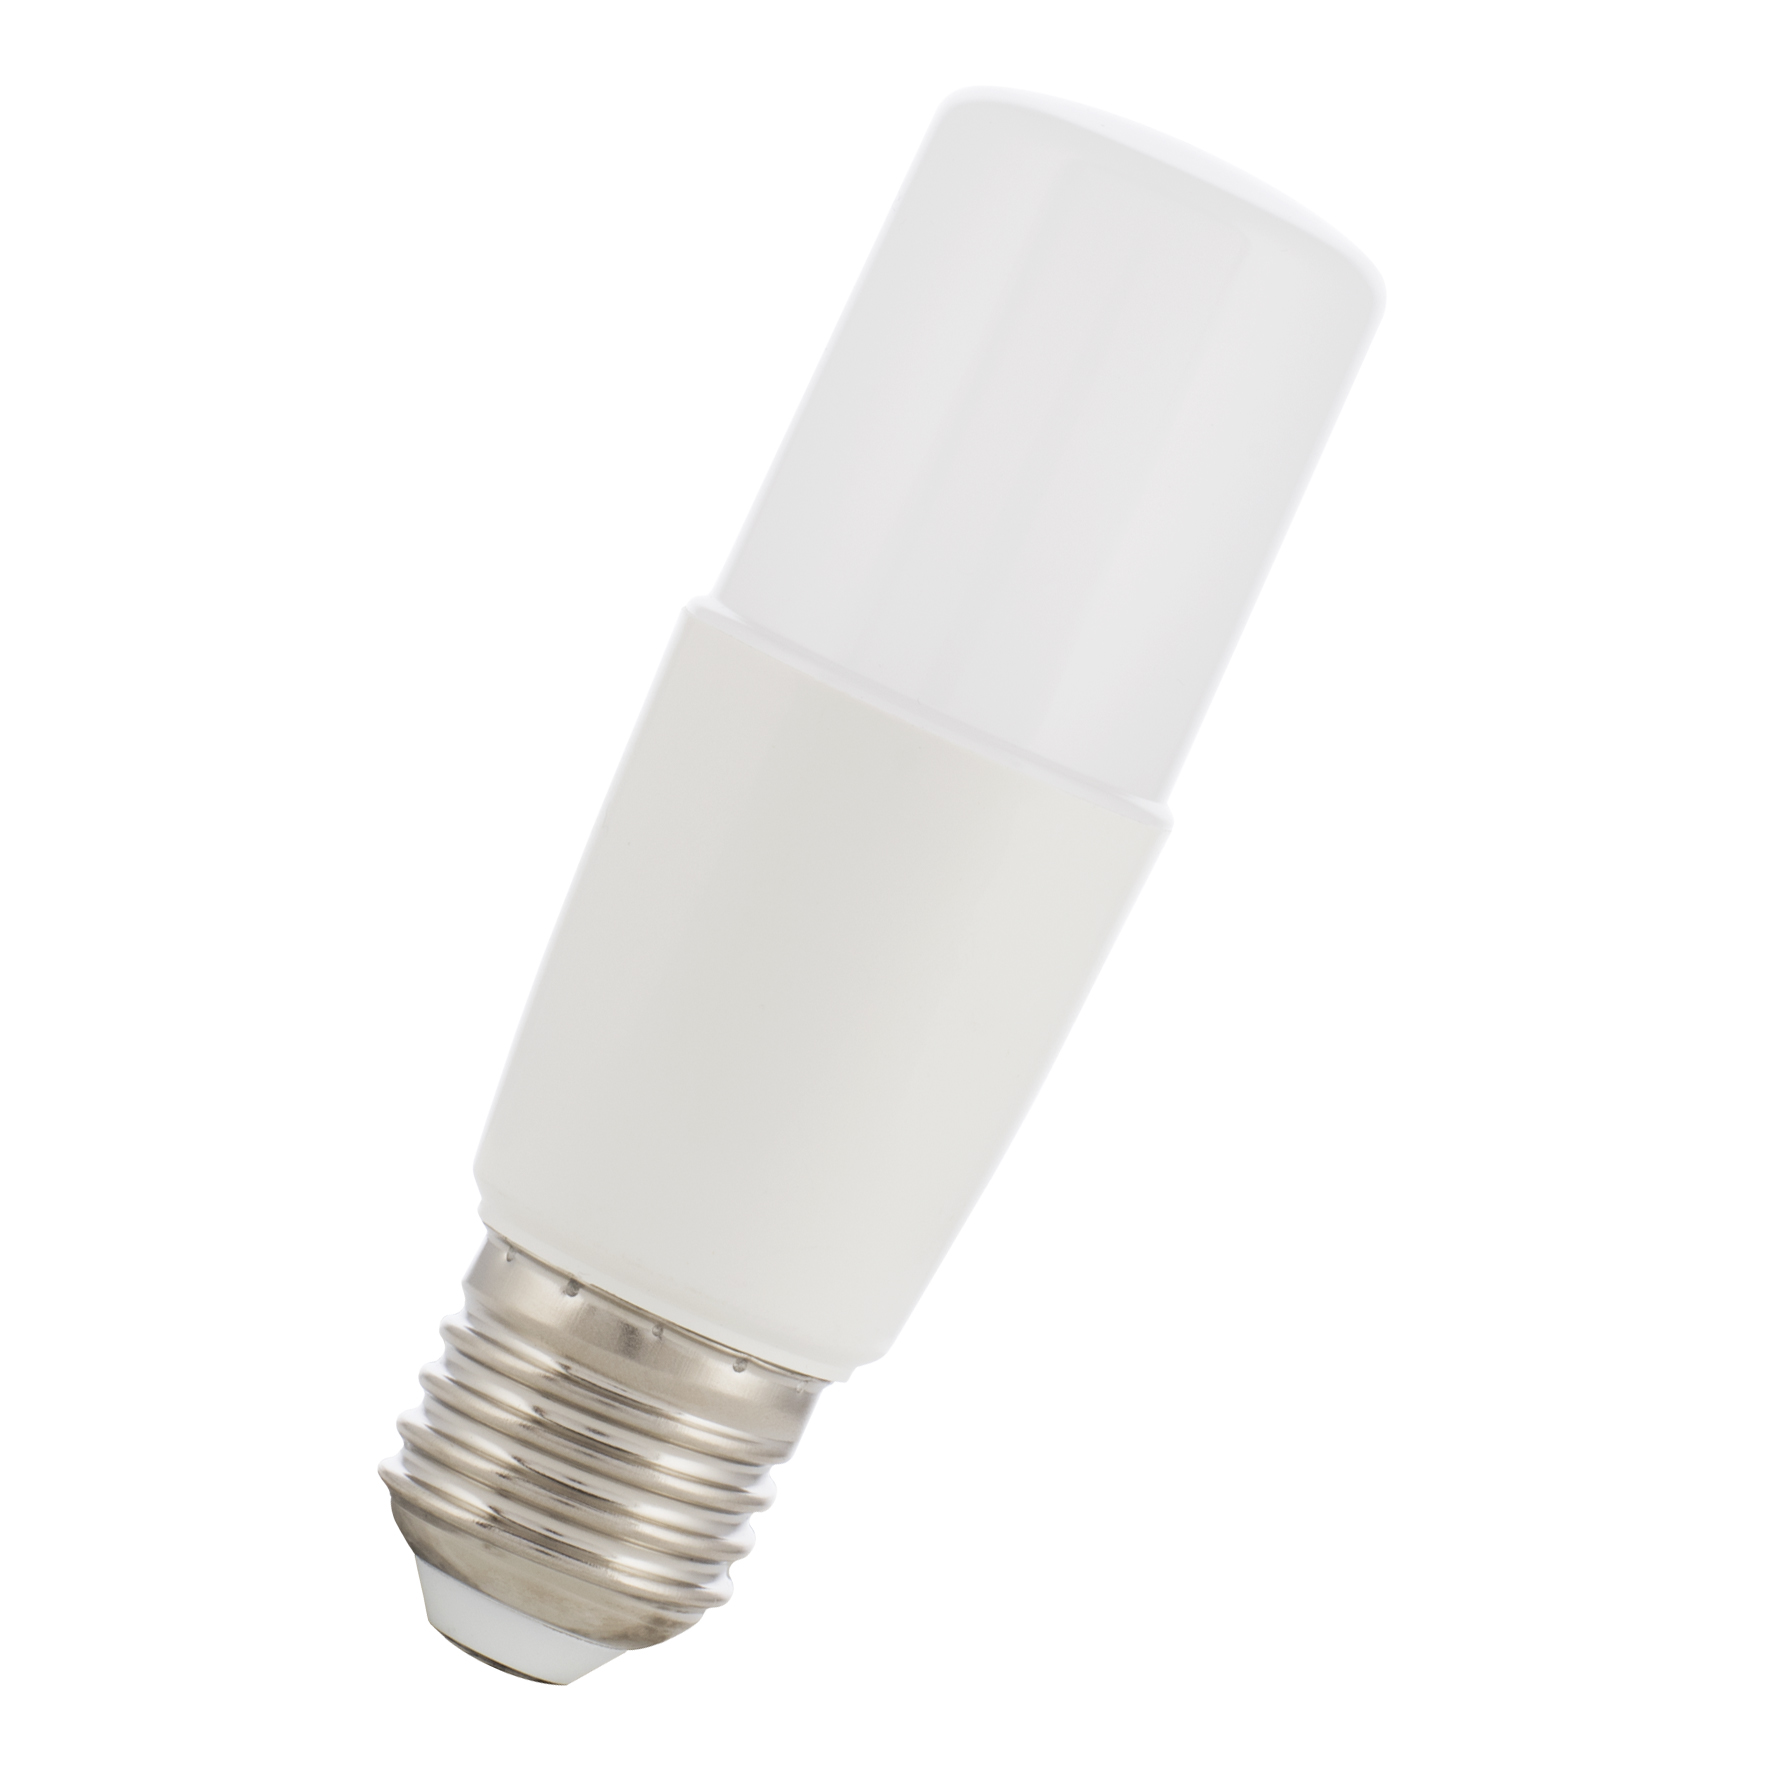 LED Ecobasic Compact T37 E27 5W (37W) 430lm 830